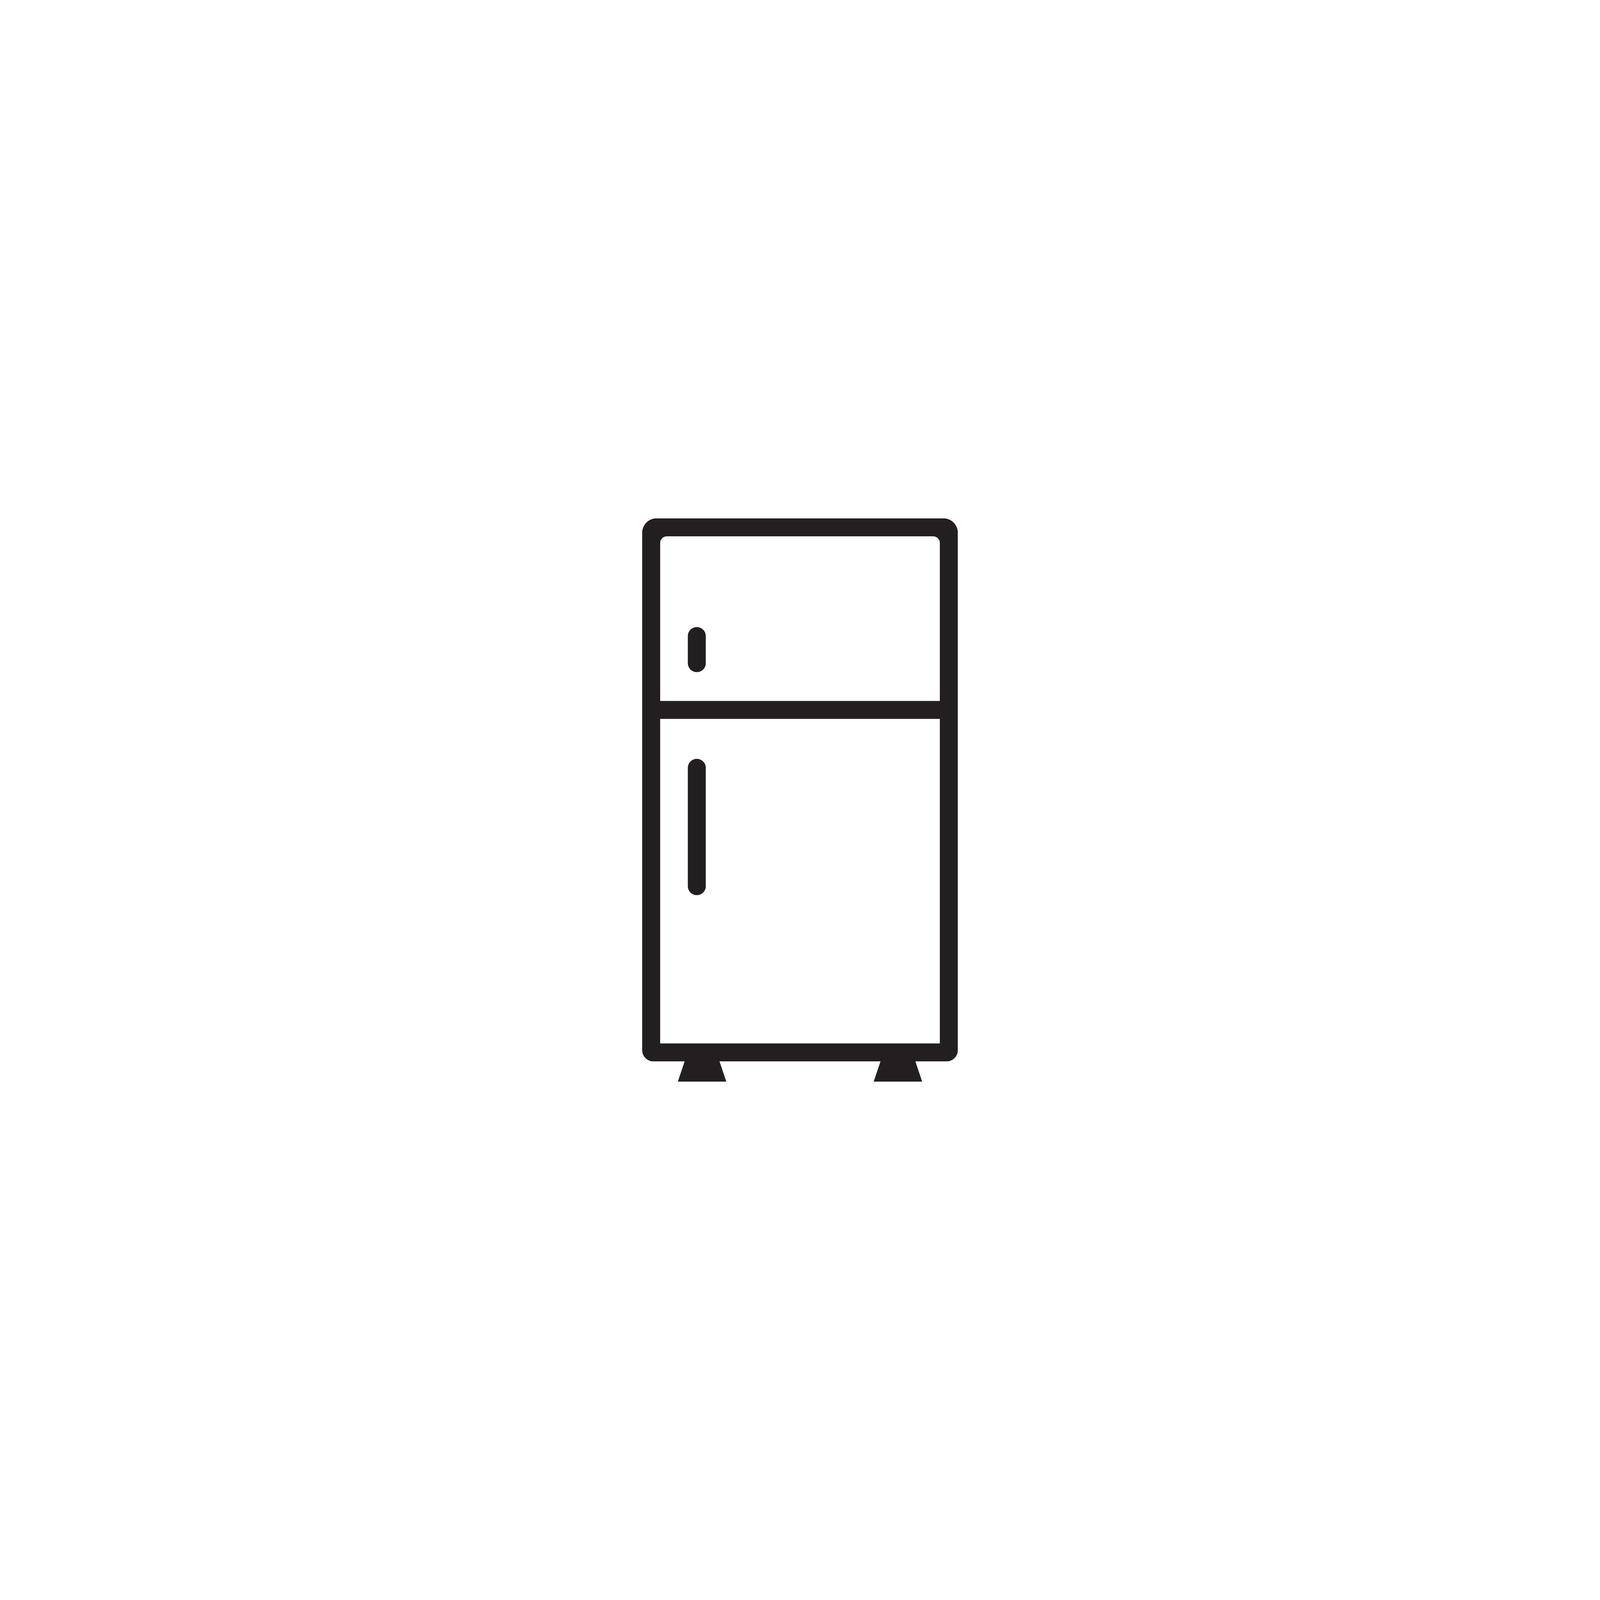 Refrigerator icon by rnking